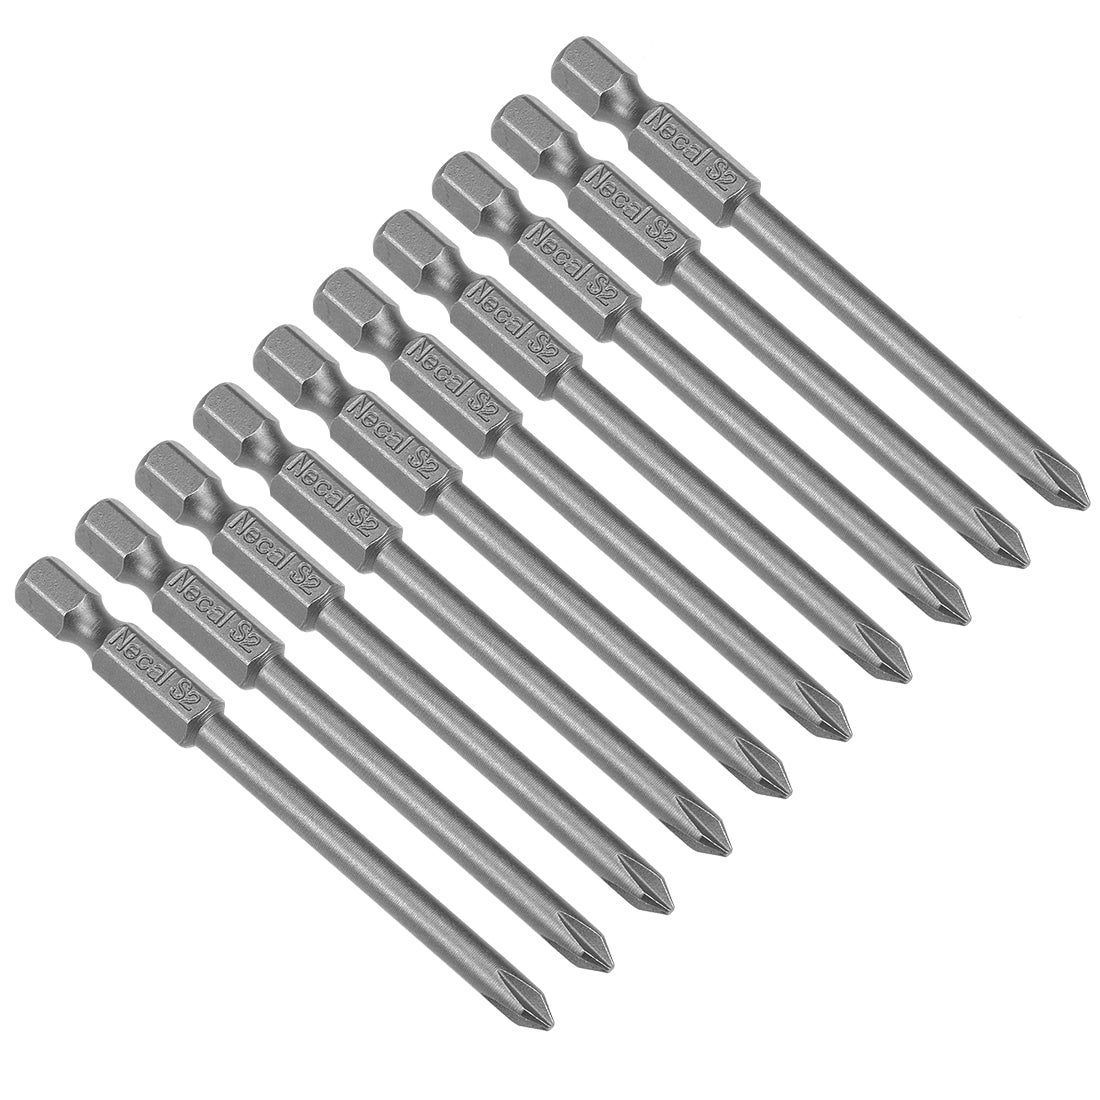 Uxcell Uxcell 10pcs 75mm 1/4" Hex Shank Magnetic 4.5mm PH1 Phillips Head Screwdriver Bits S2